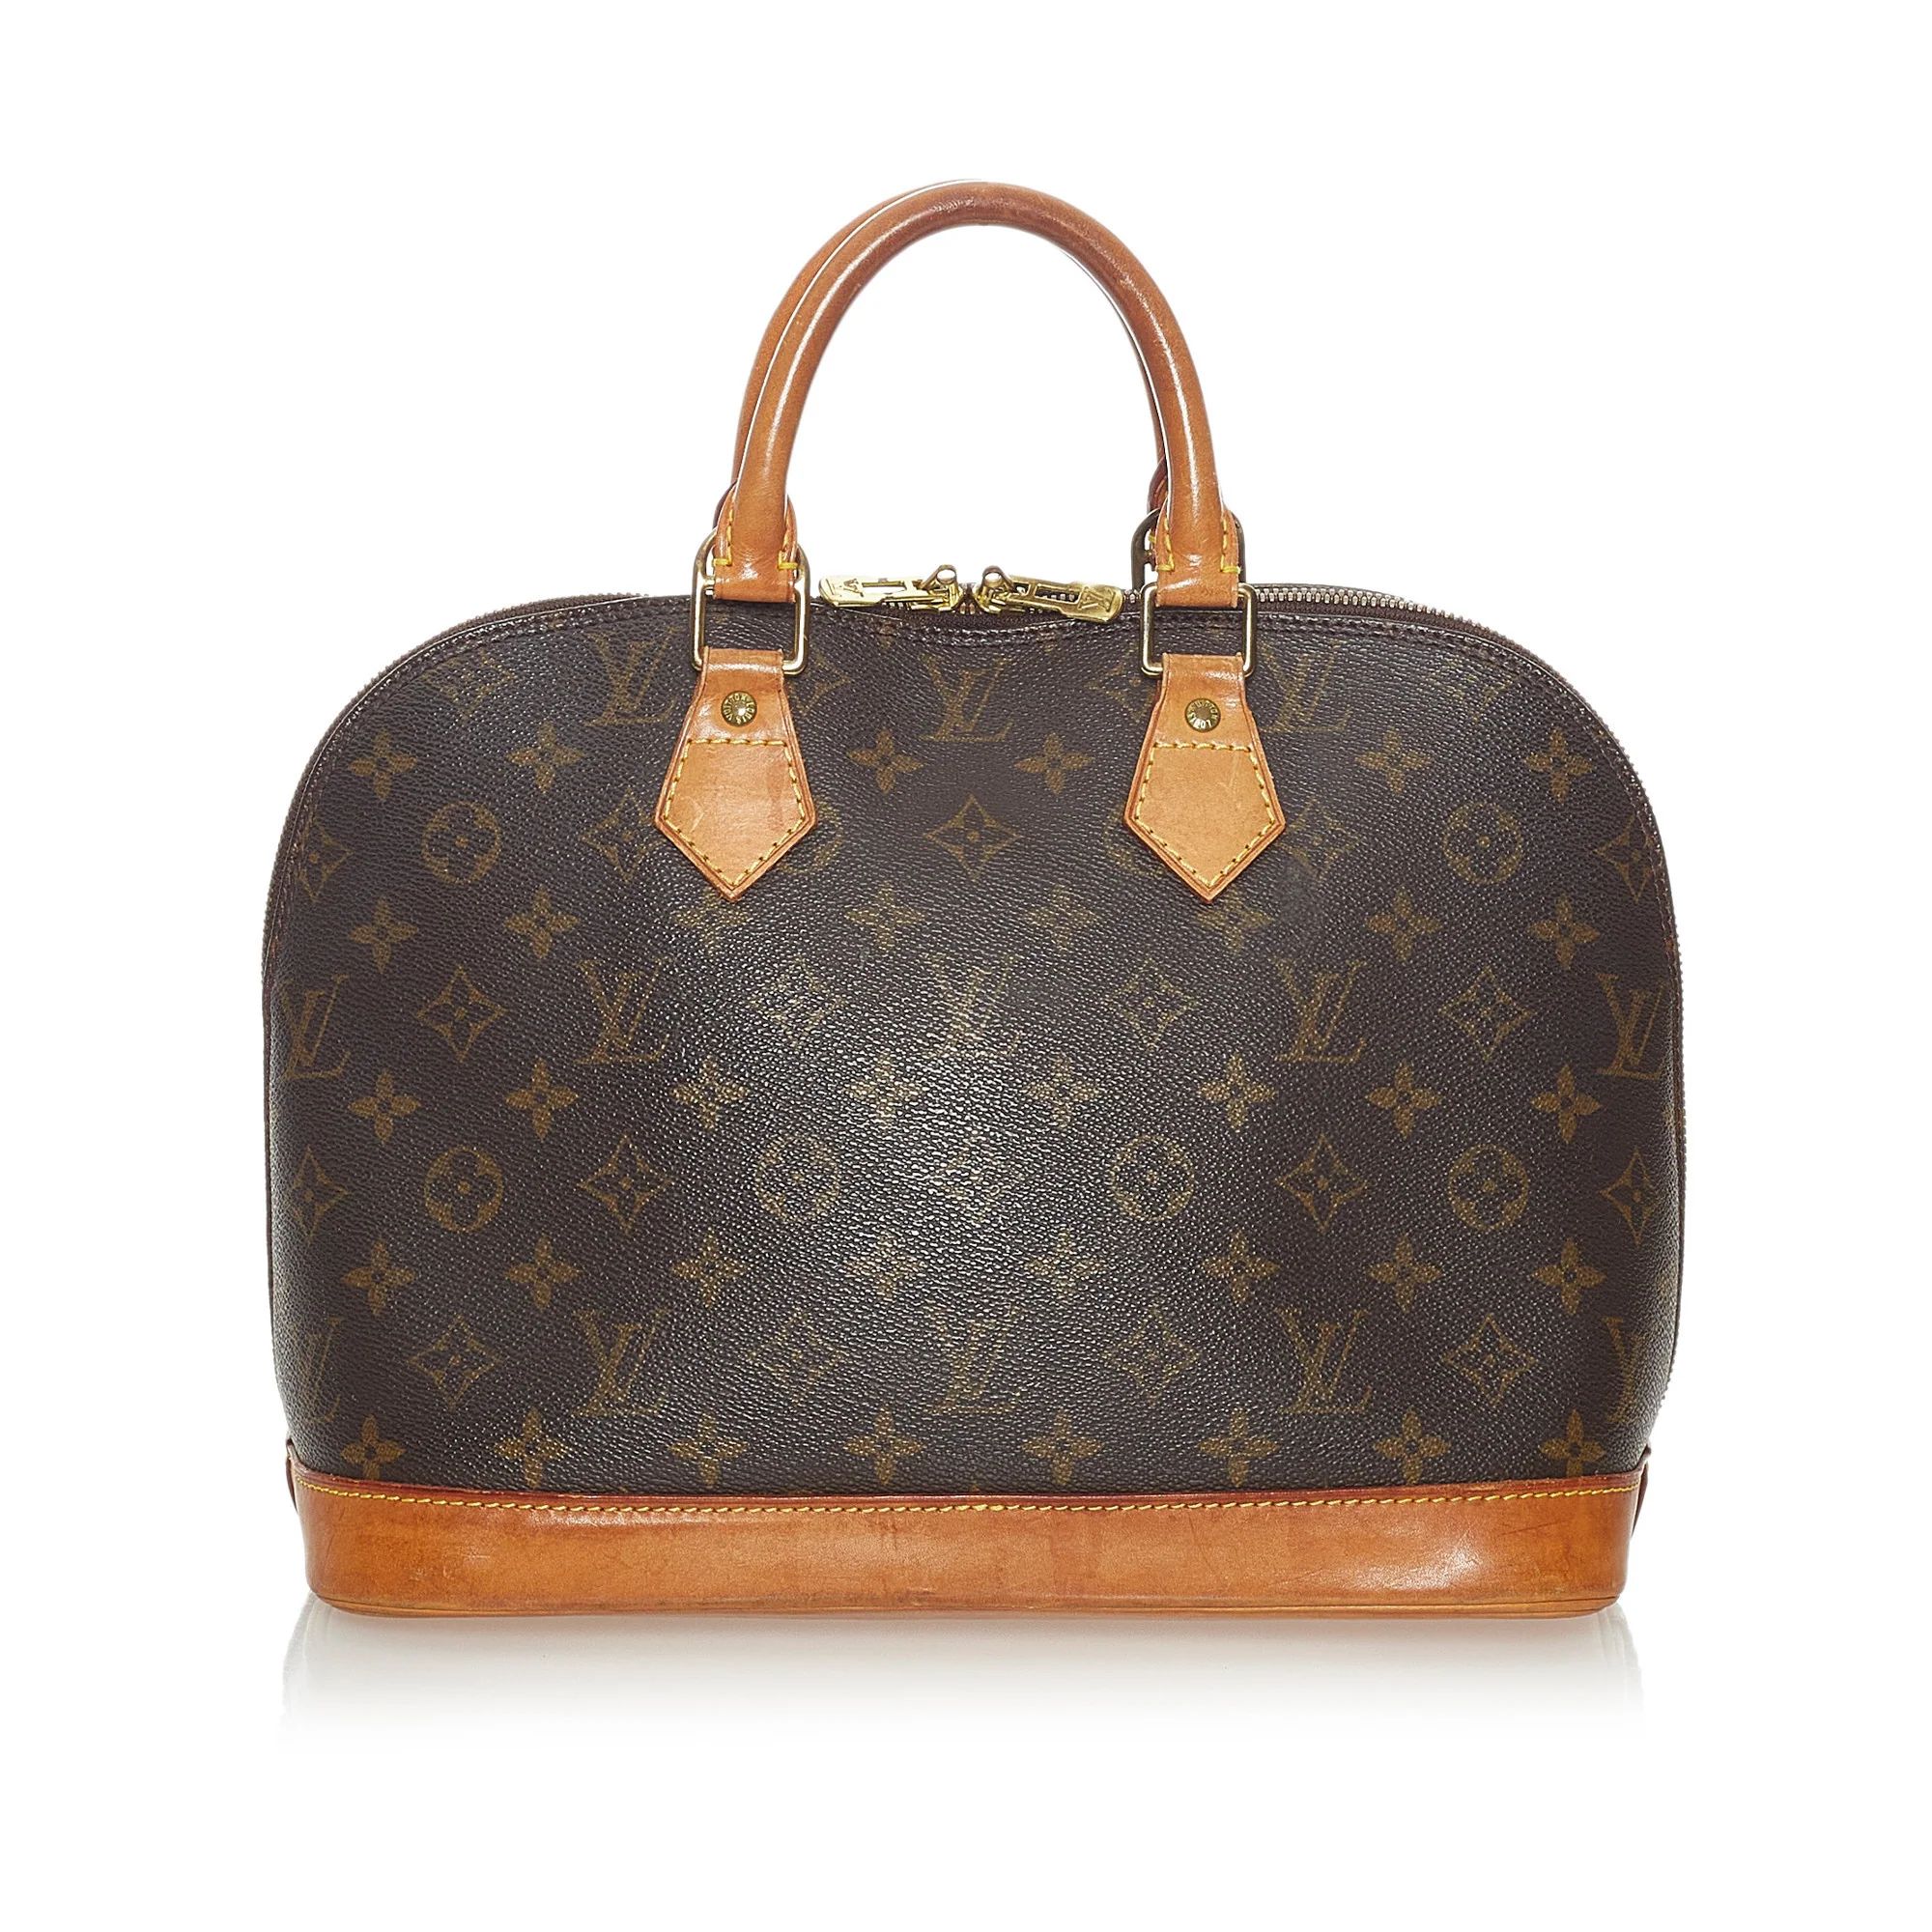 Louis Vuitton Alma PM Bag in Brown Lord & Taylor | Lord & Taylor